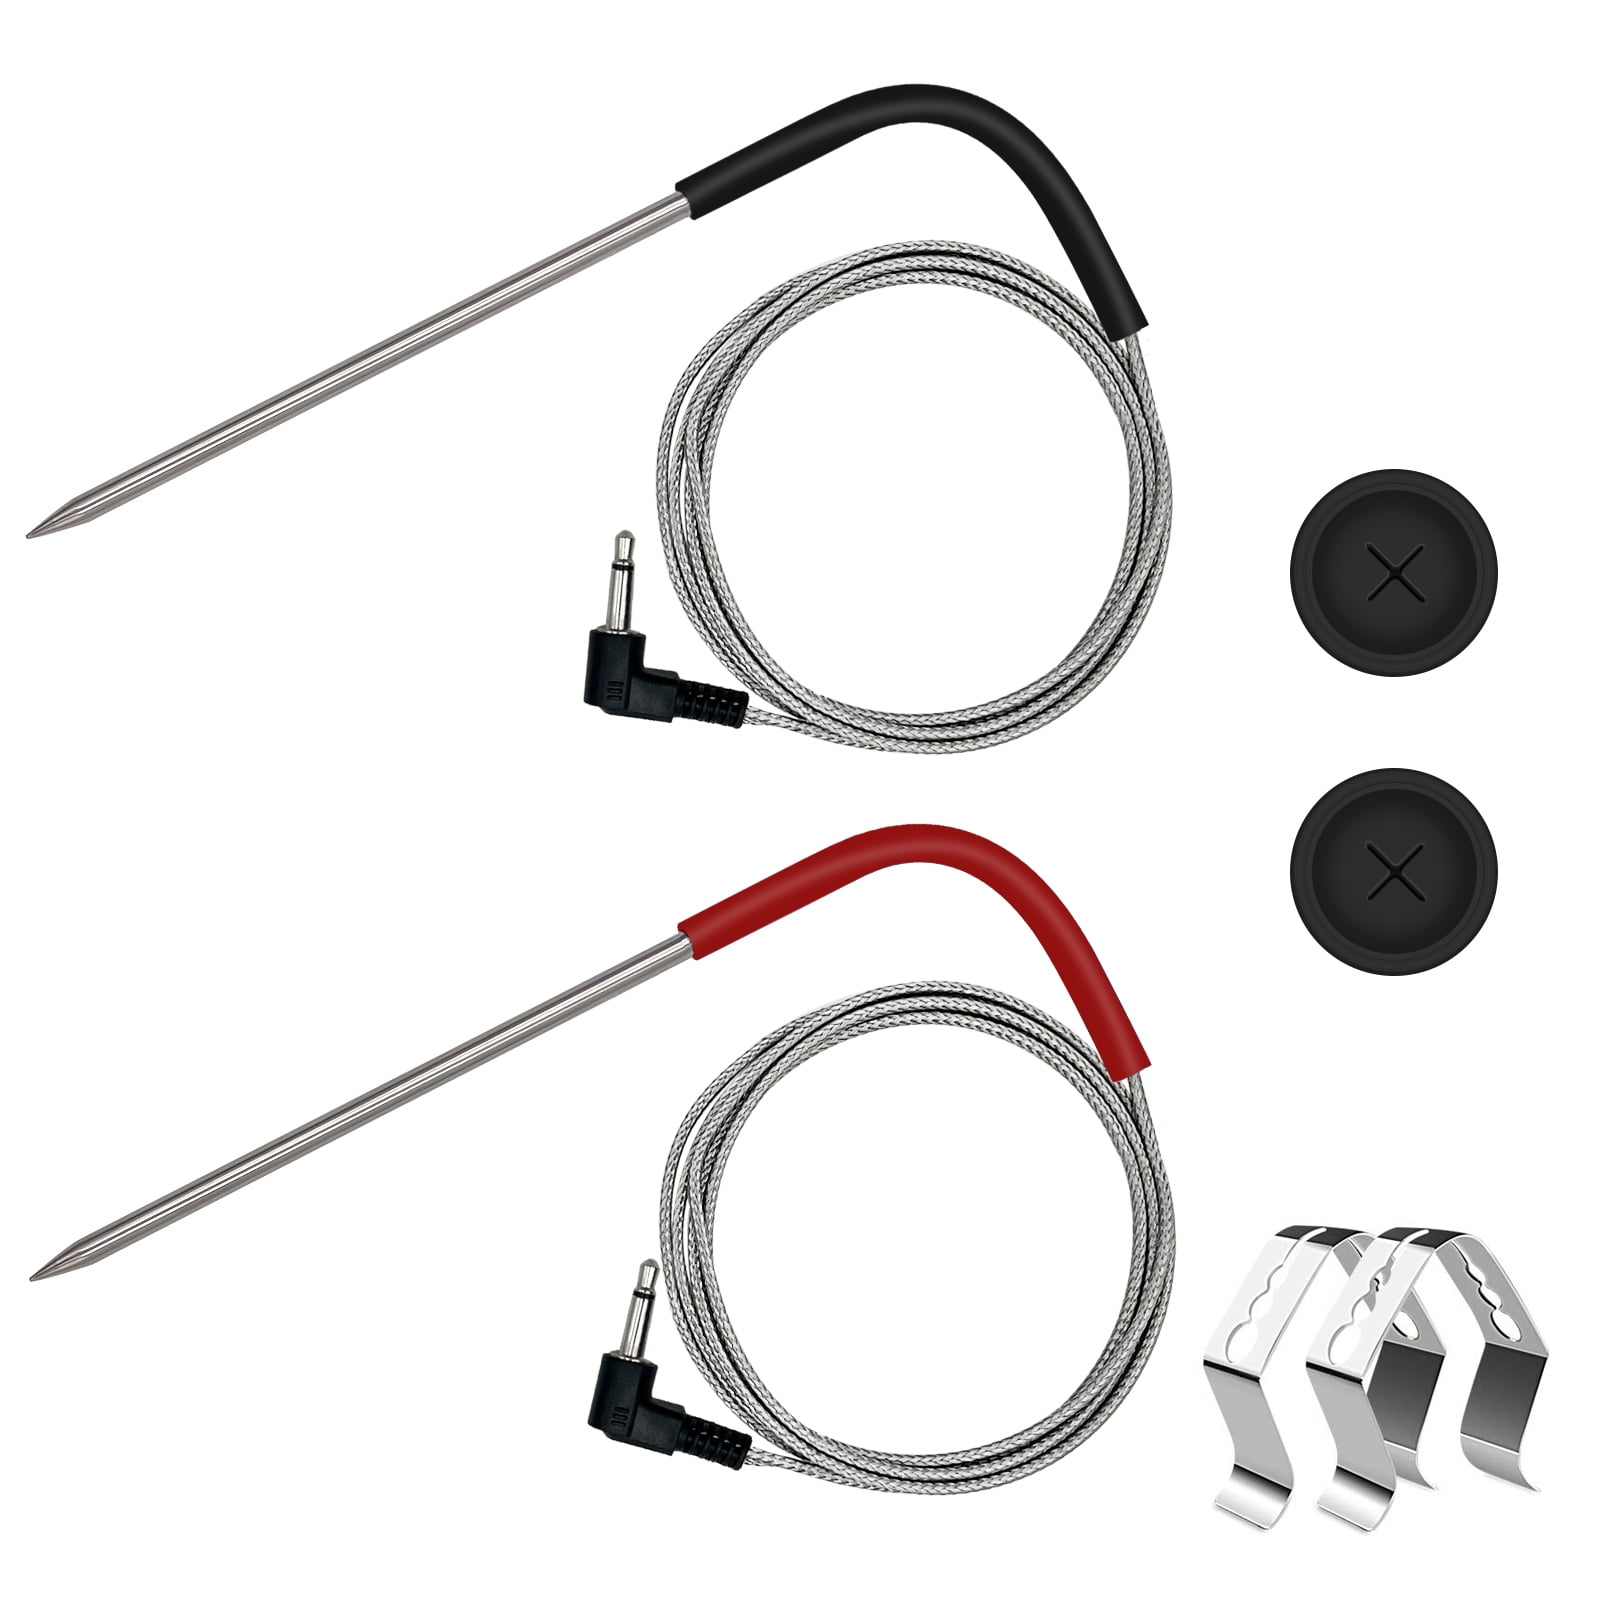 Entsong 2-Pack Replacement Meat Probe for Traeger Pellet Grill, Comes with Probe Grommet and Temperature Probe Clip